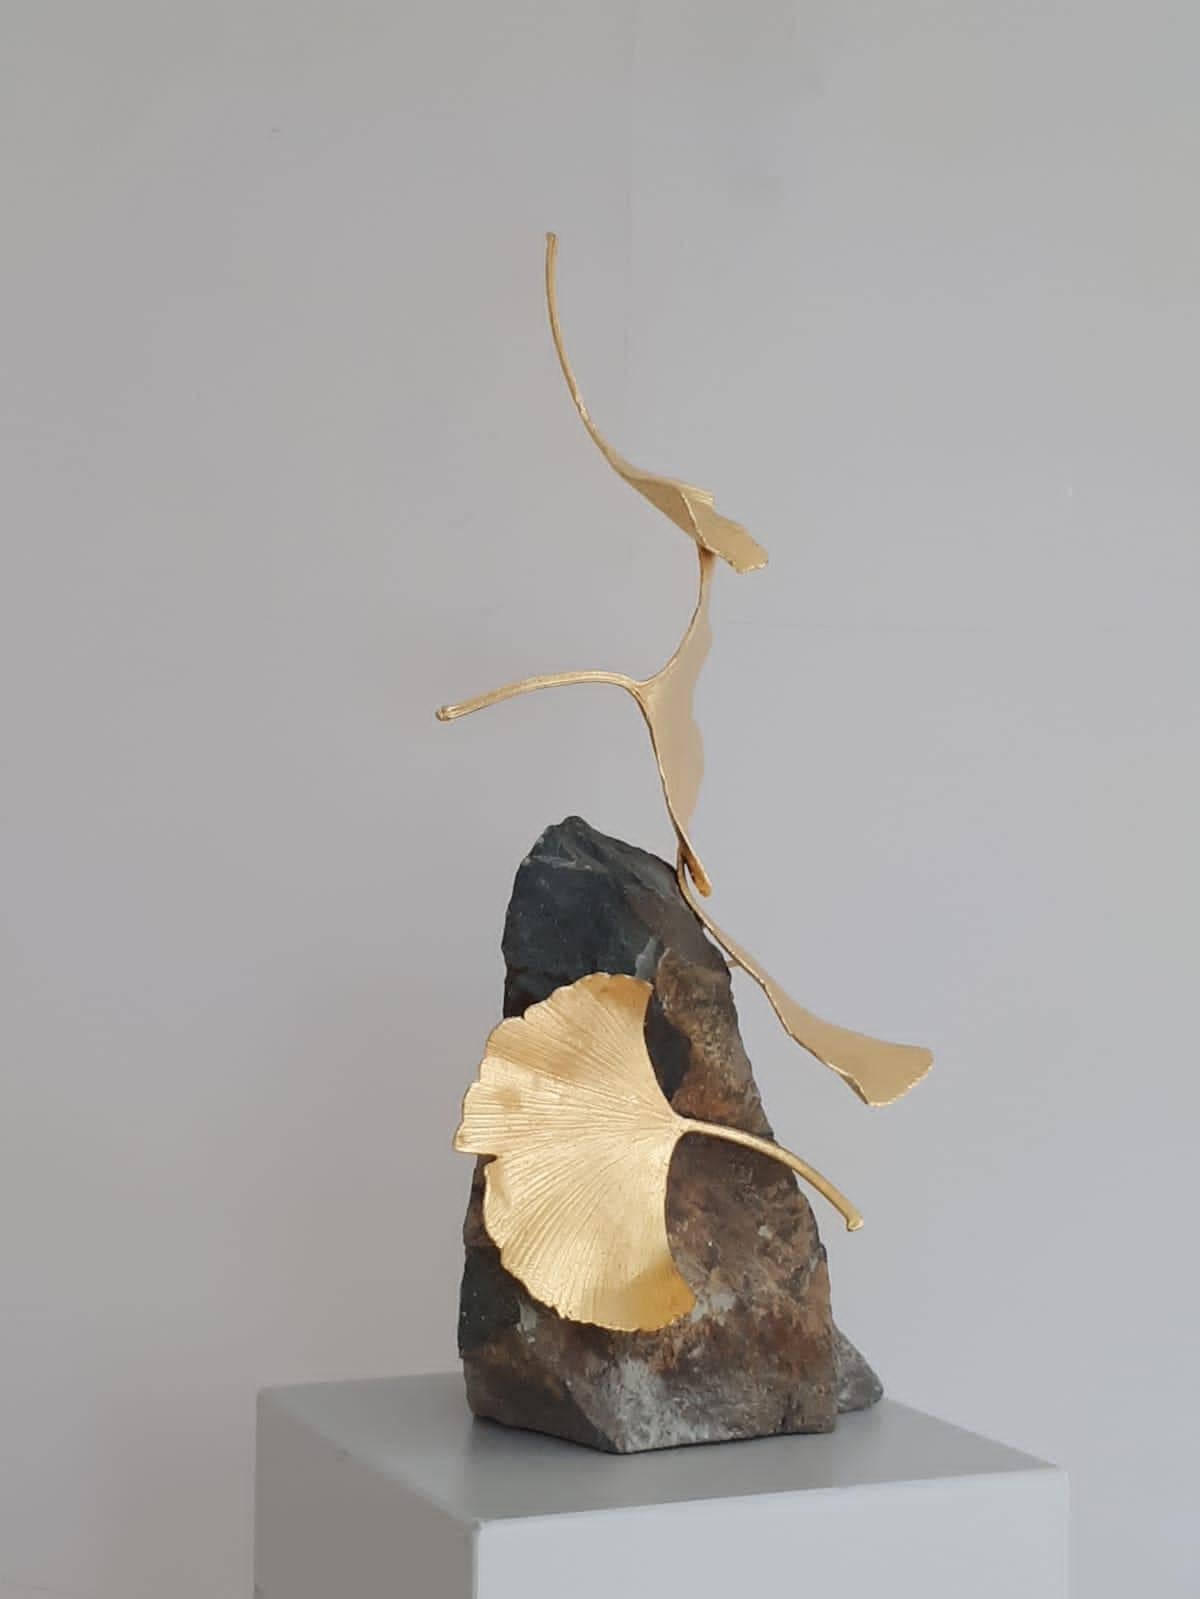 5 Leaf Stone Gingko by Kuno Vollet - Gilded Brass Gingko sculpture on stone base For Sale 2